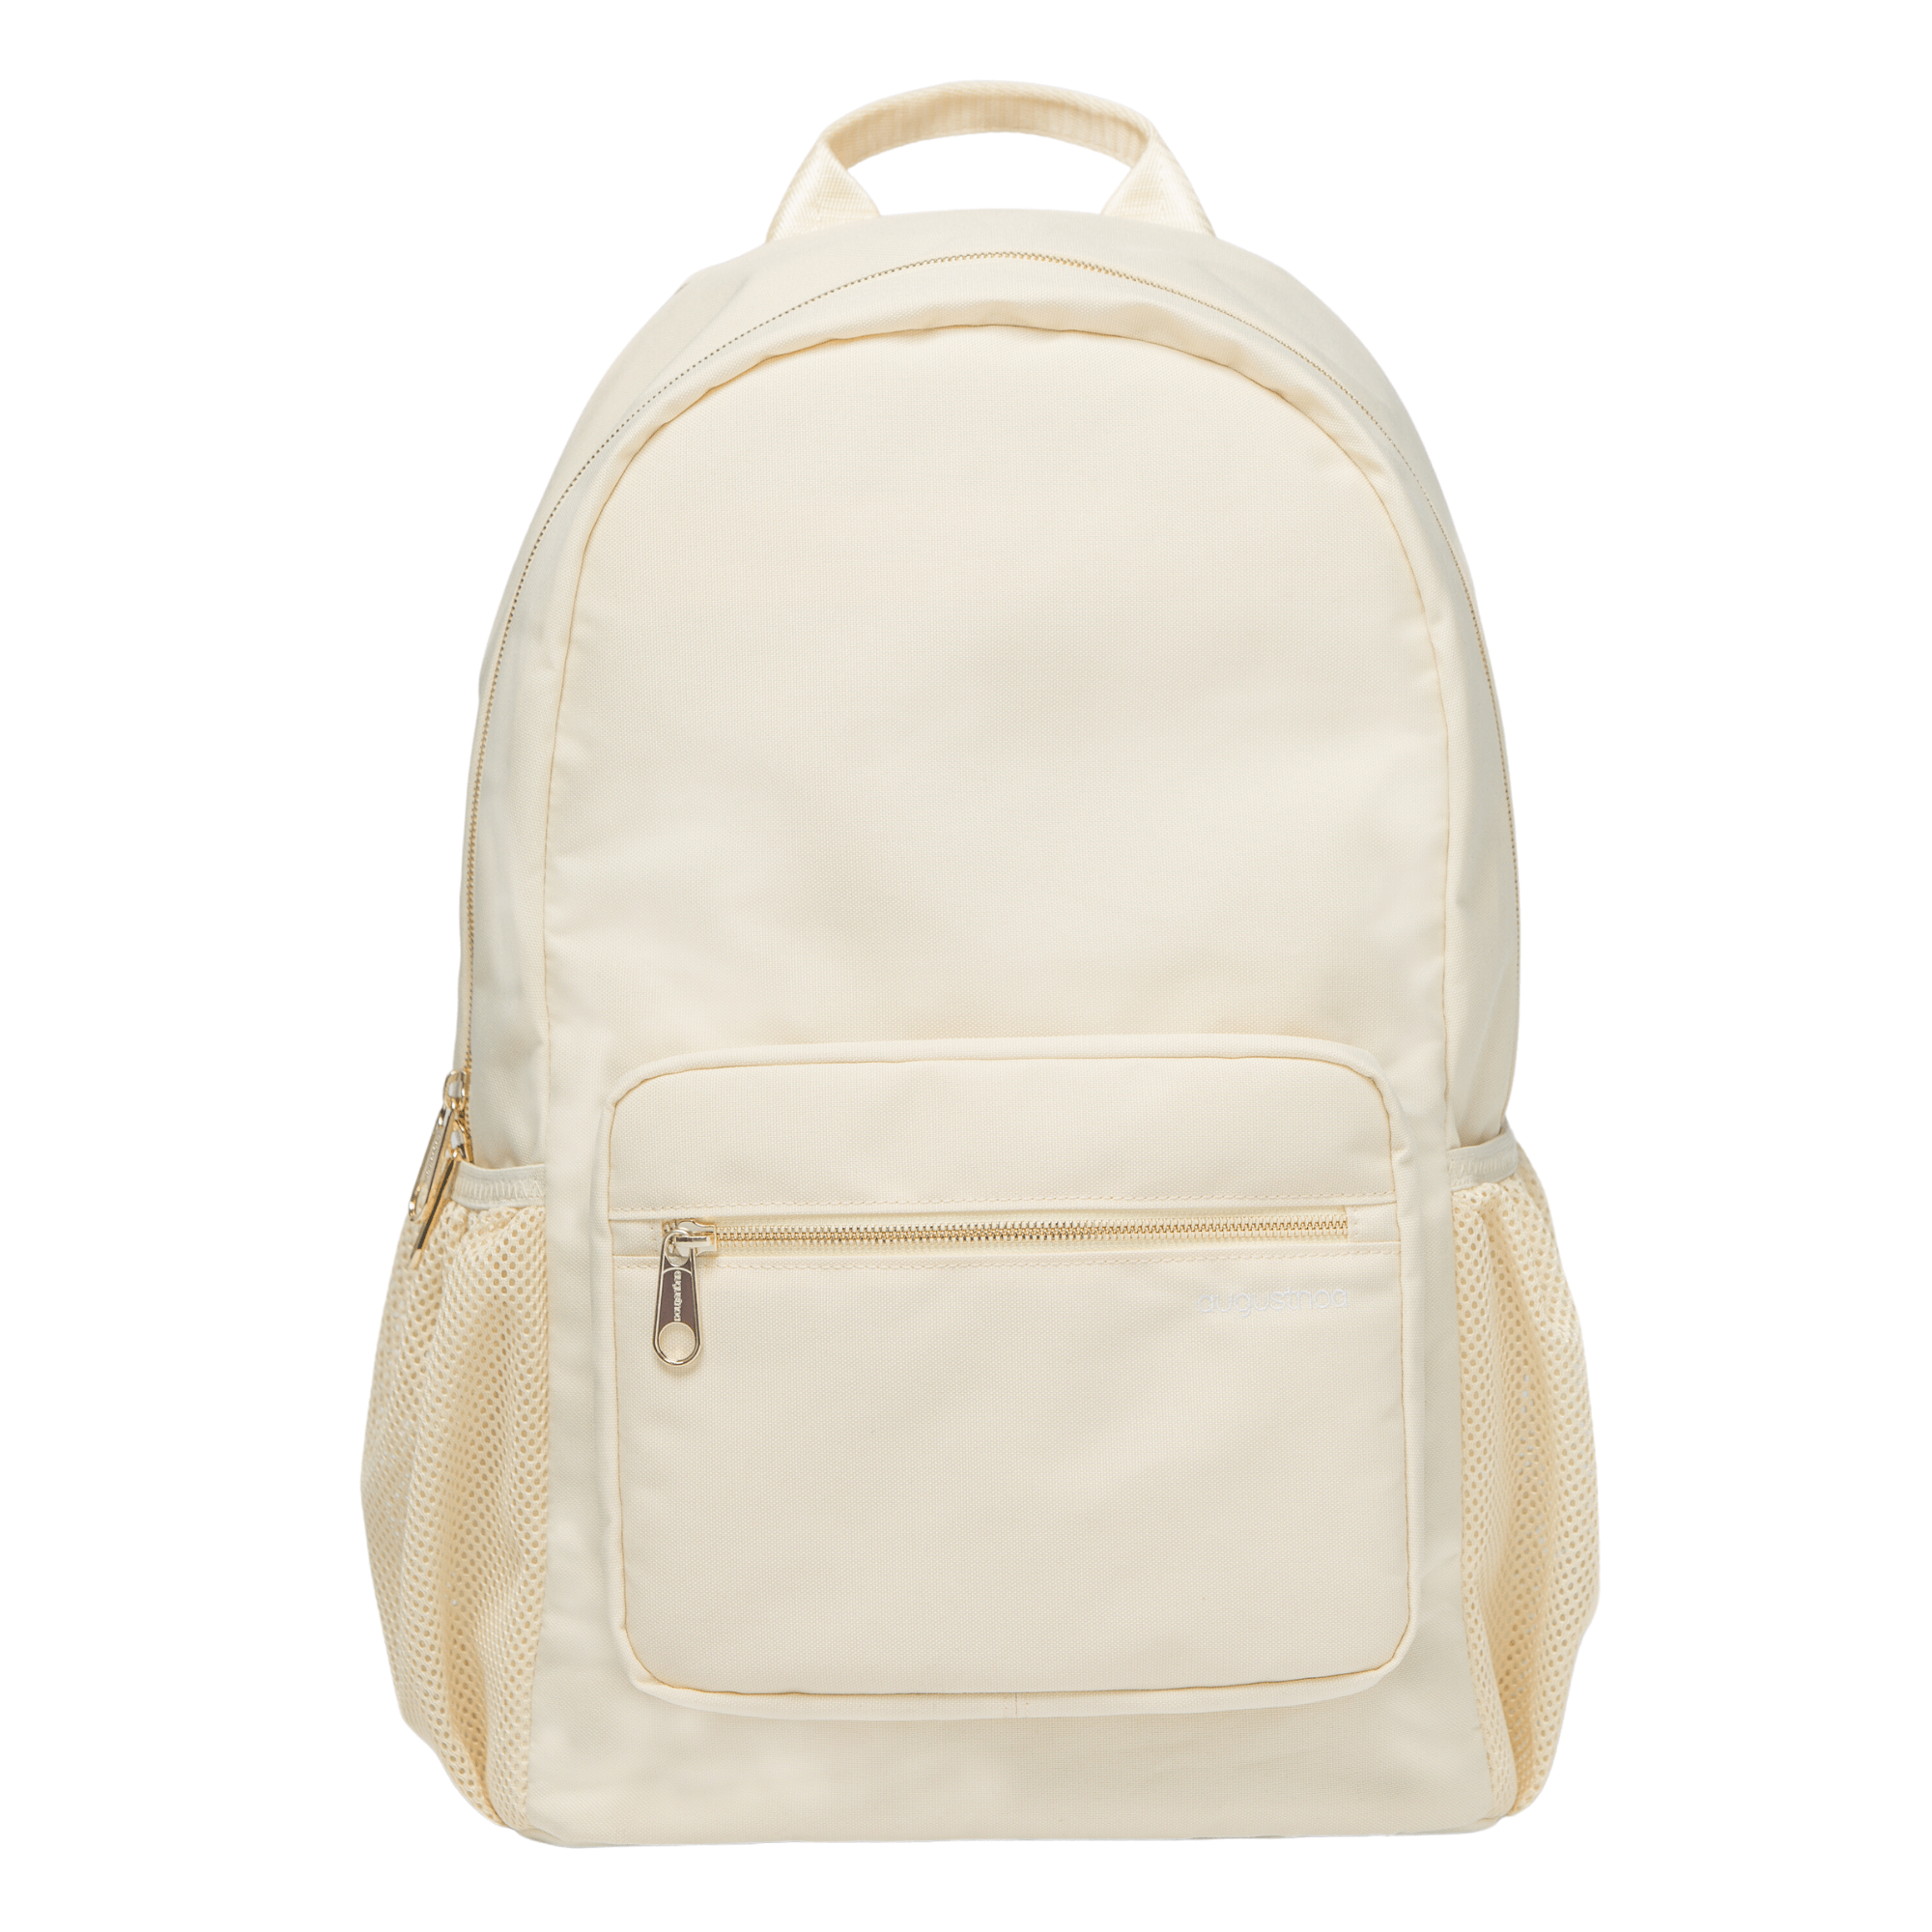 August Noa travel backpack in cream. Front view.